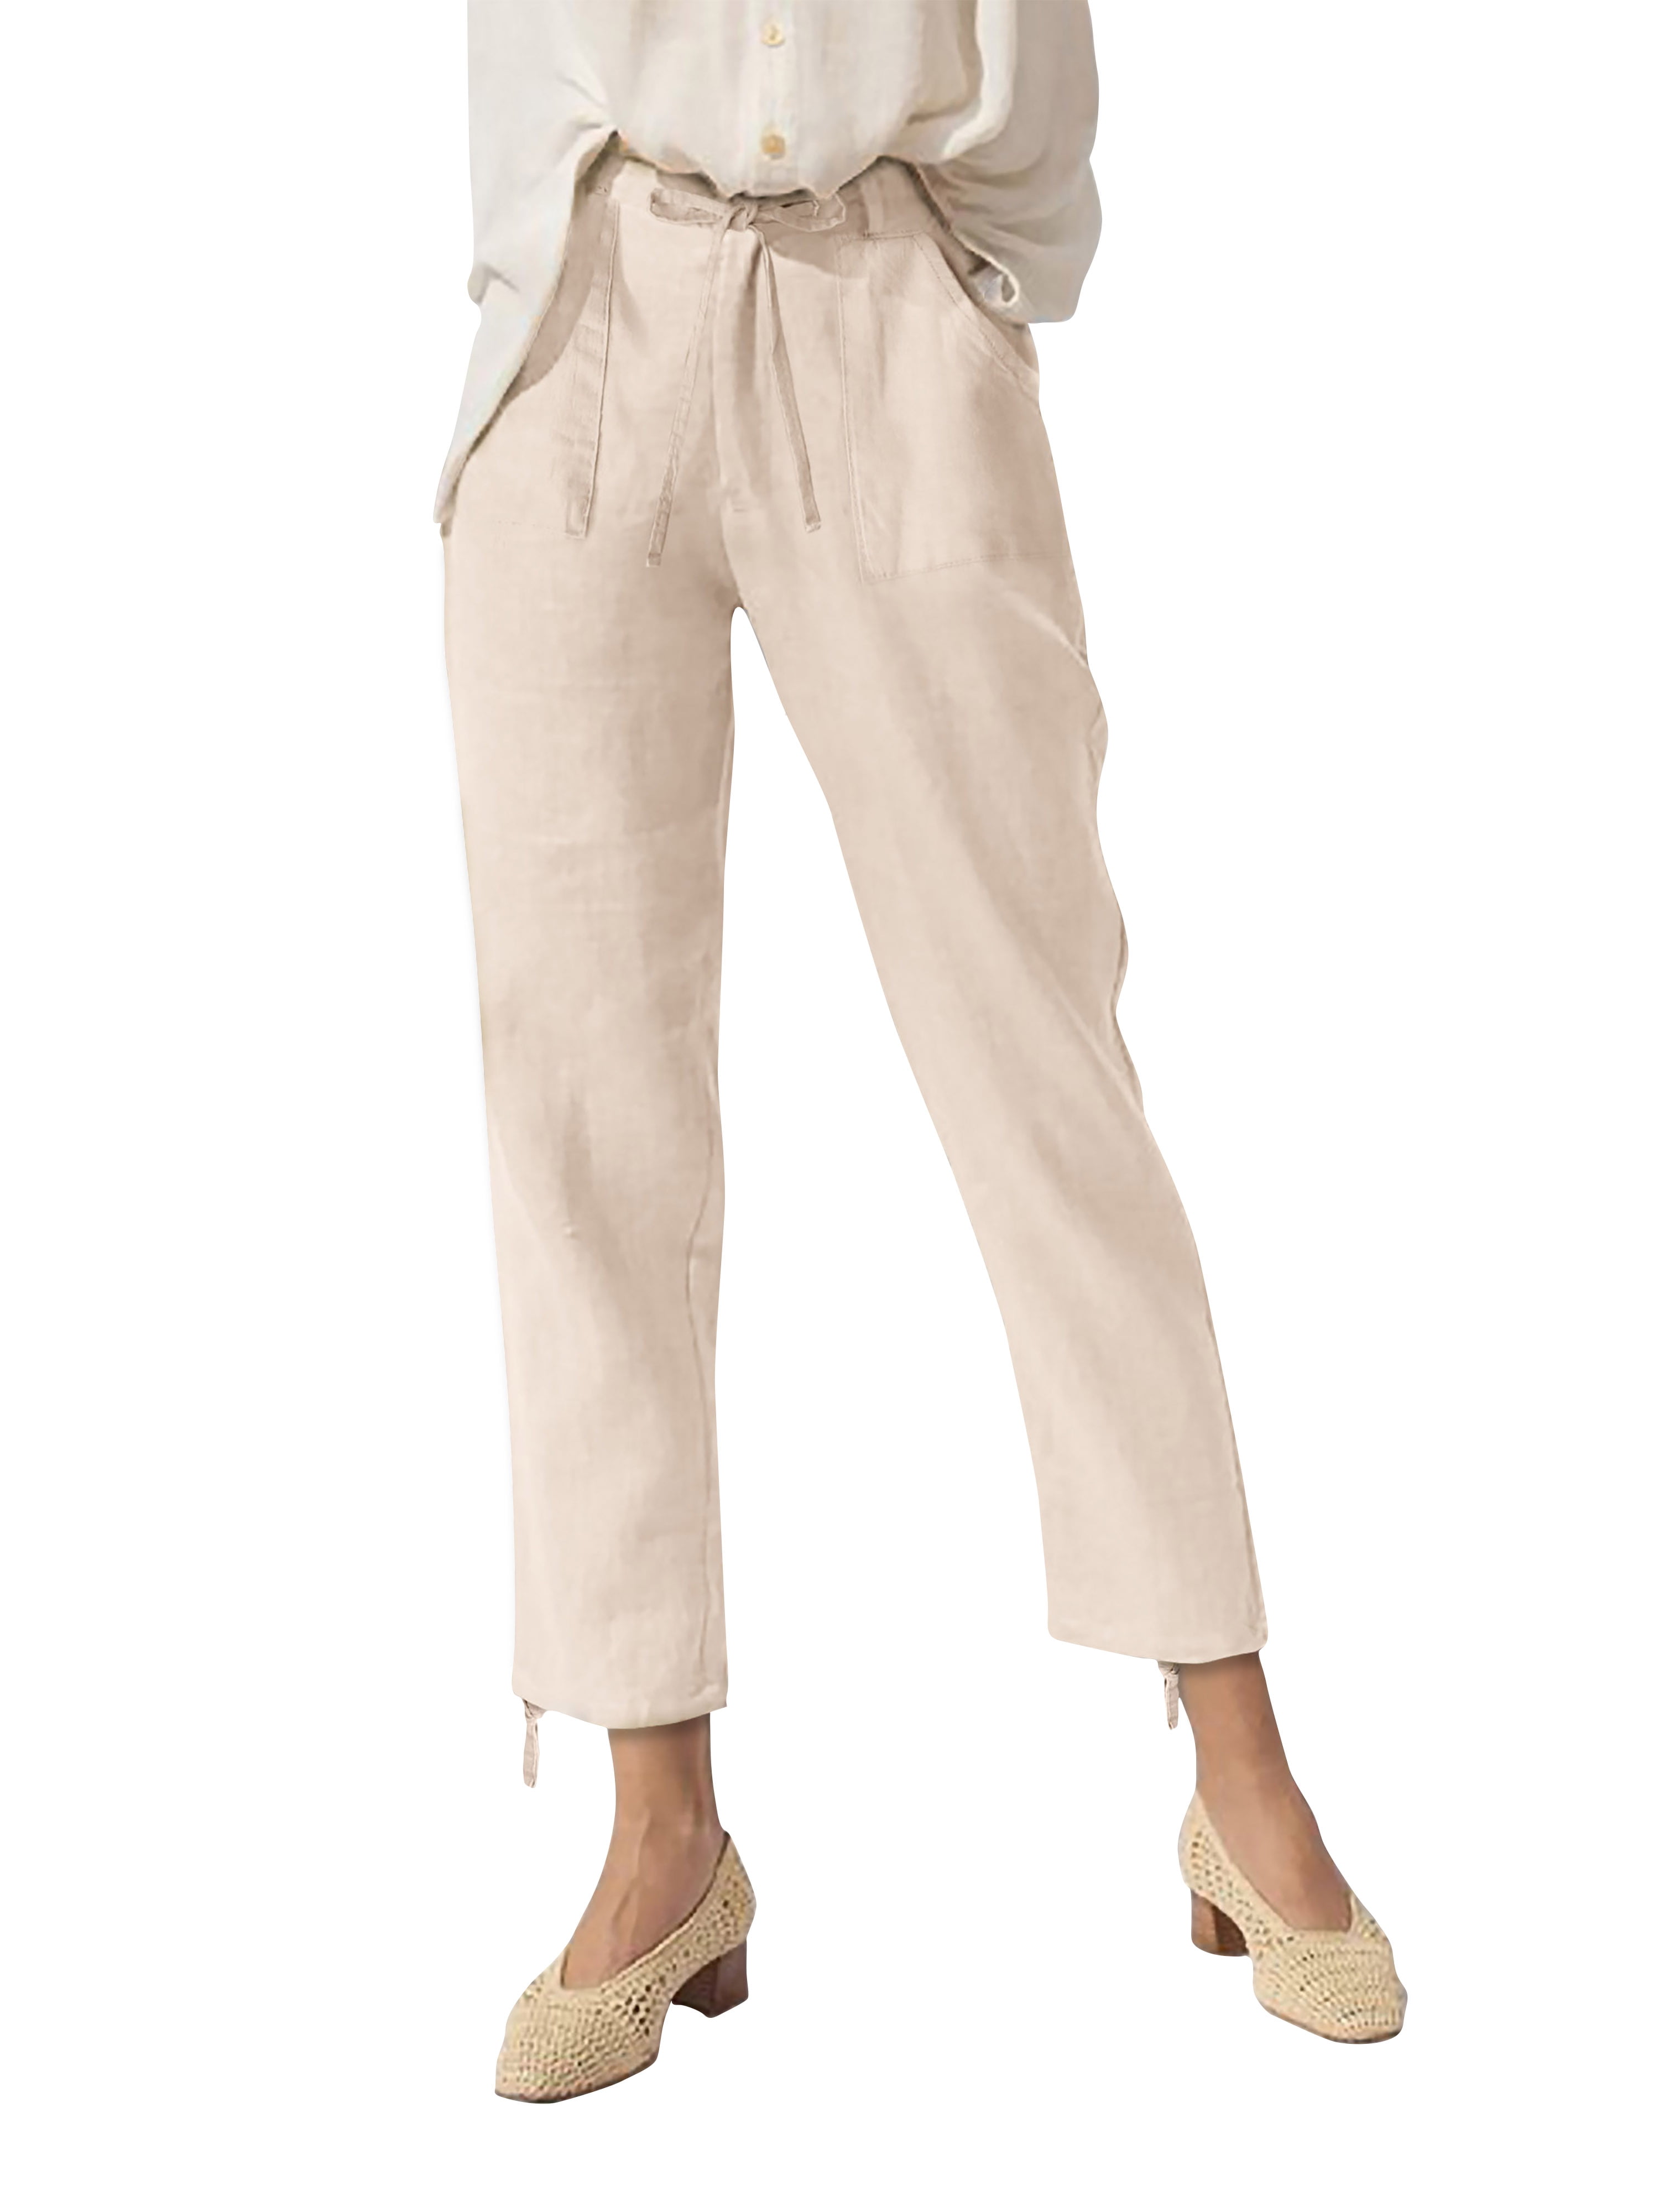 Women's Light Beige Linen Trousers Loose Fitting Wide Leg Trousers Woman Comfy Ladies Linen Pants with Elasticated Waist and Drawstring